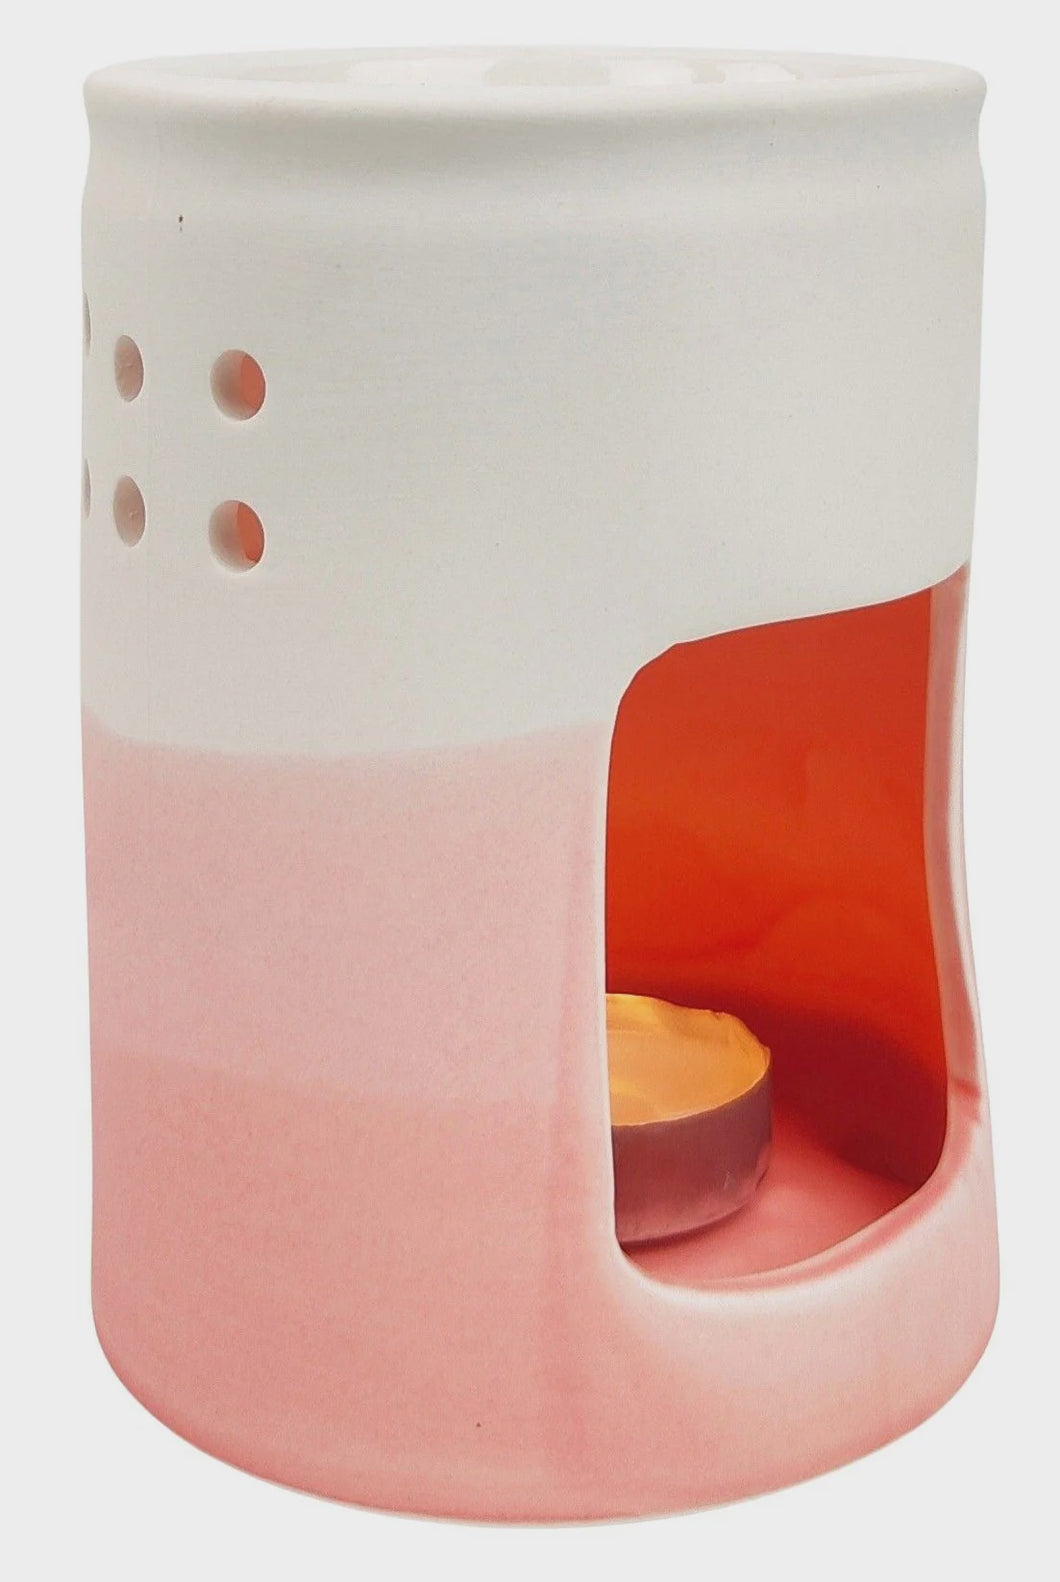 Alora Horizon Oil Burner White & Pink Alora Horizon Oil Burner is a charming addition to liven up any space. Rosies Gifts for your kitchen, dining, lounge decor items. Mosgiel, Dunedin